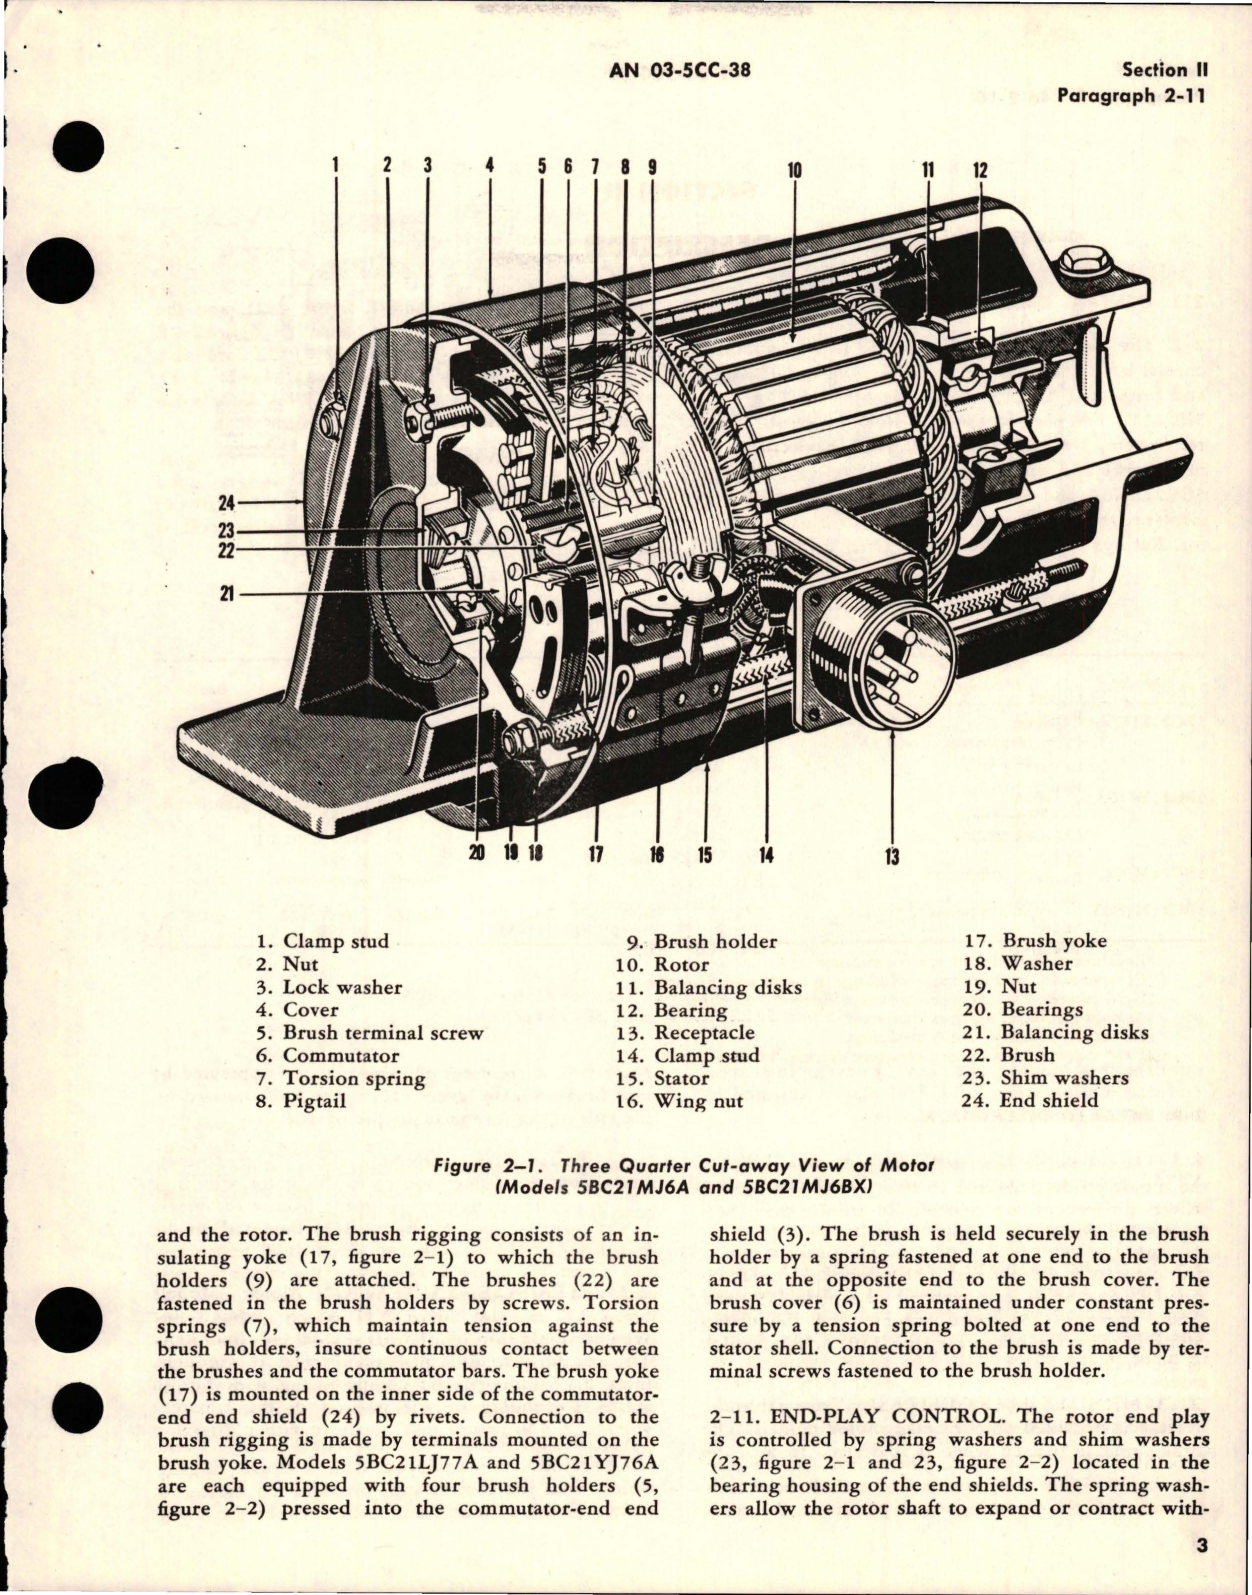 Sample page 7 from AirCorps Library document: Overhaul Instructions for Aircraft Motors - Series 5BC21 